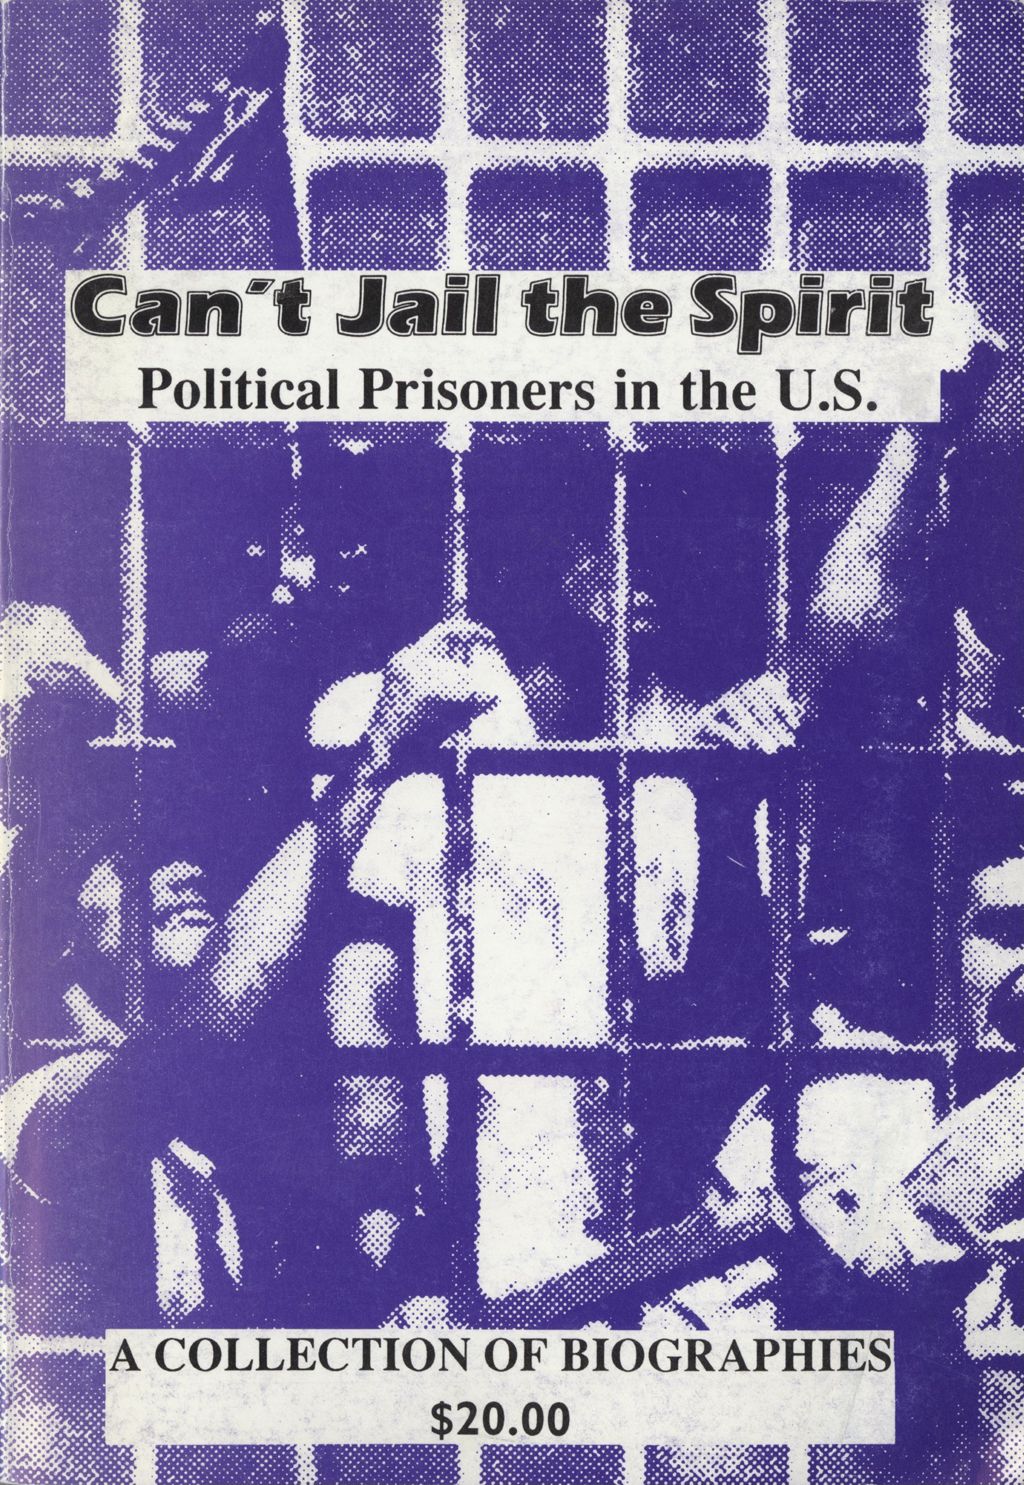 Miniature of Can't Jail the Spirit: Political Prisoners in the U.S. (selected pages)